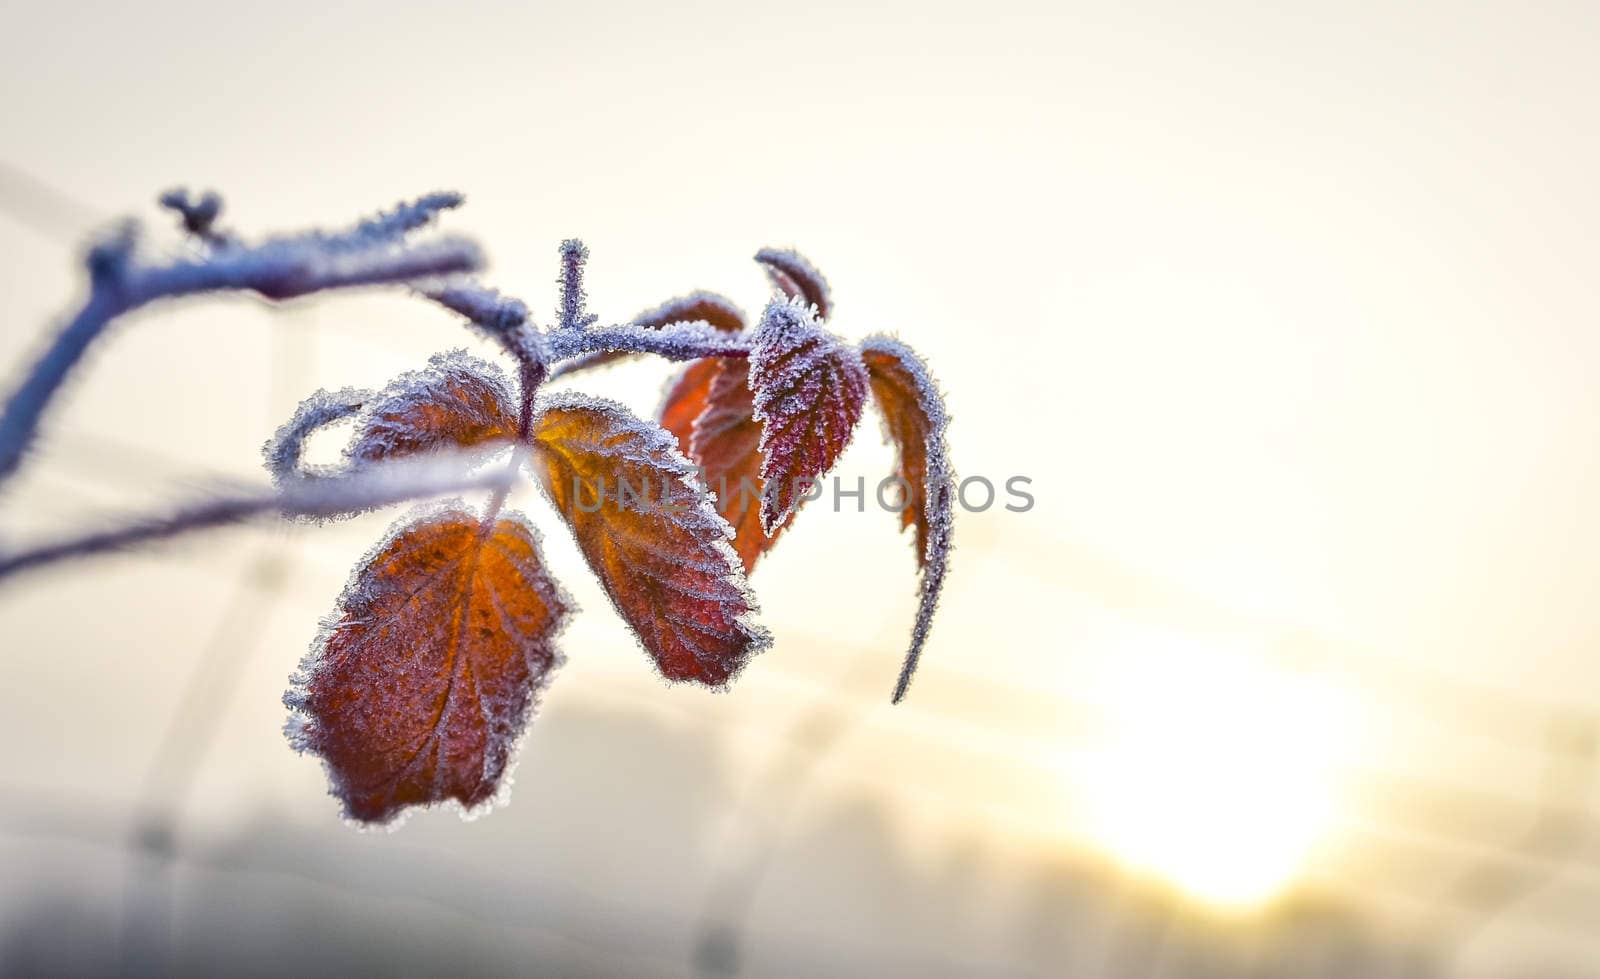 Ice covered leaves tell of winter's coming by valleyboi63